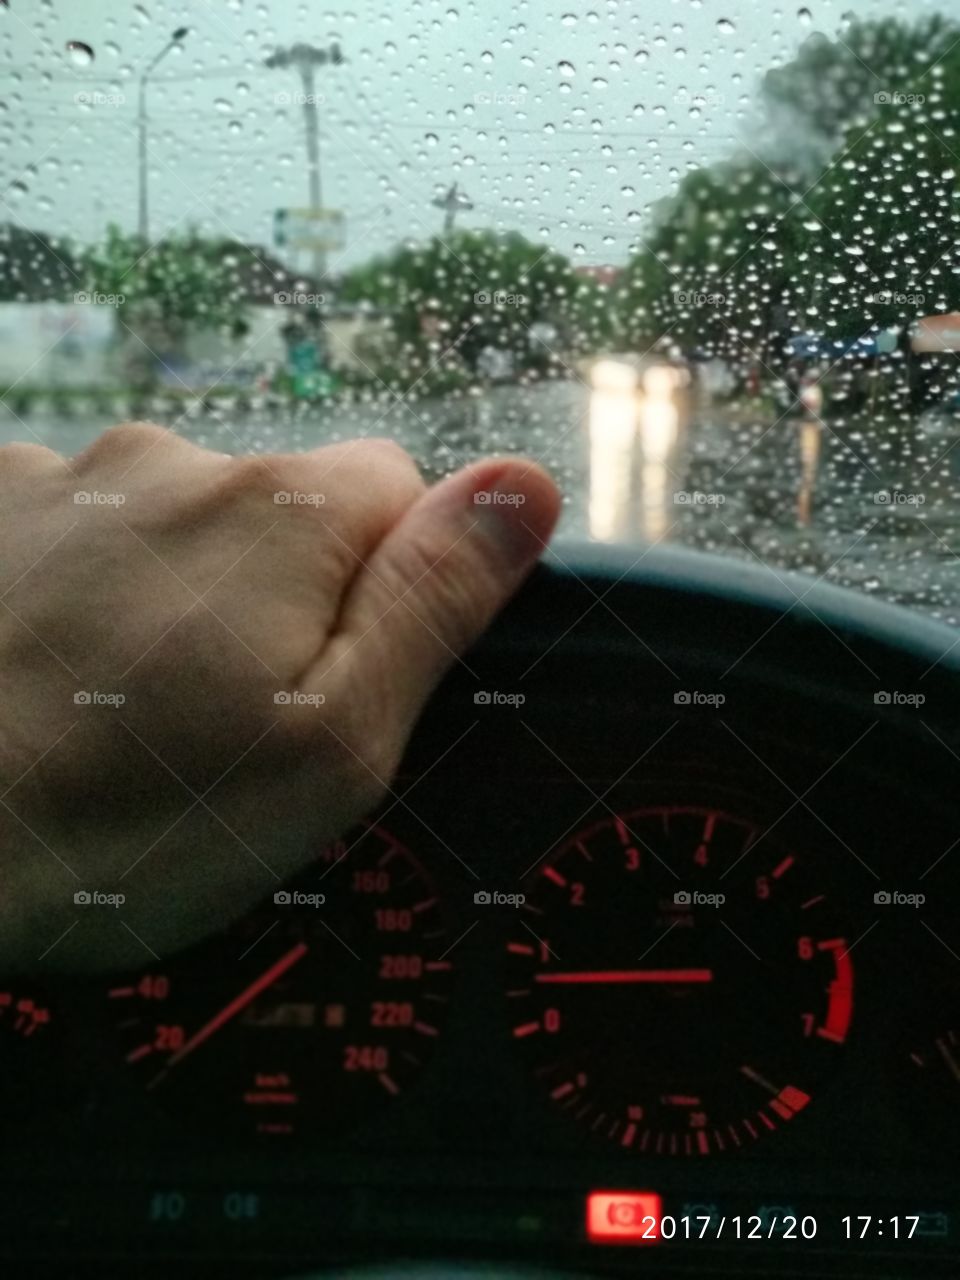 The Rain On The road